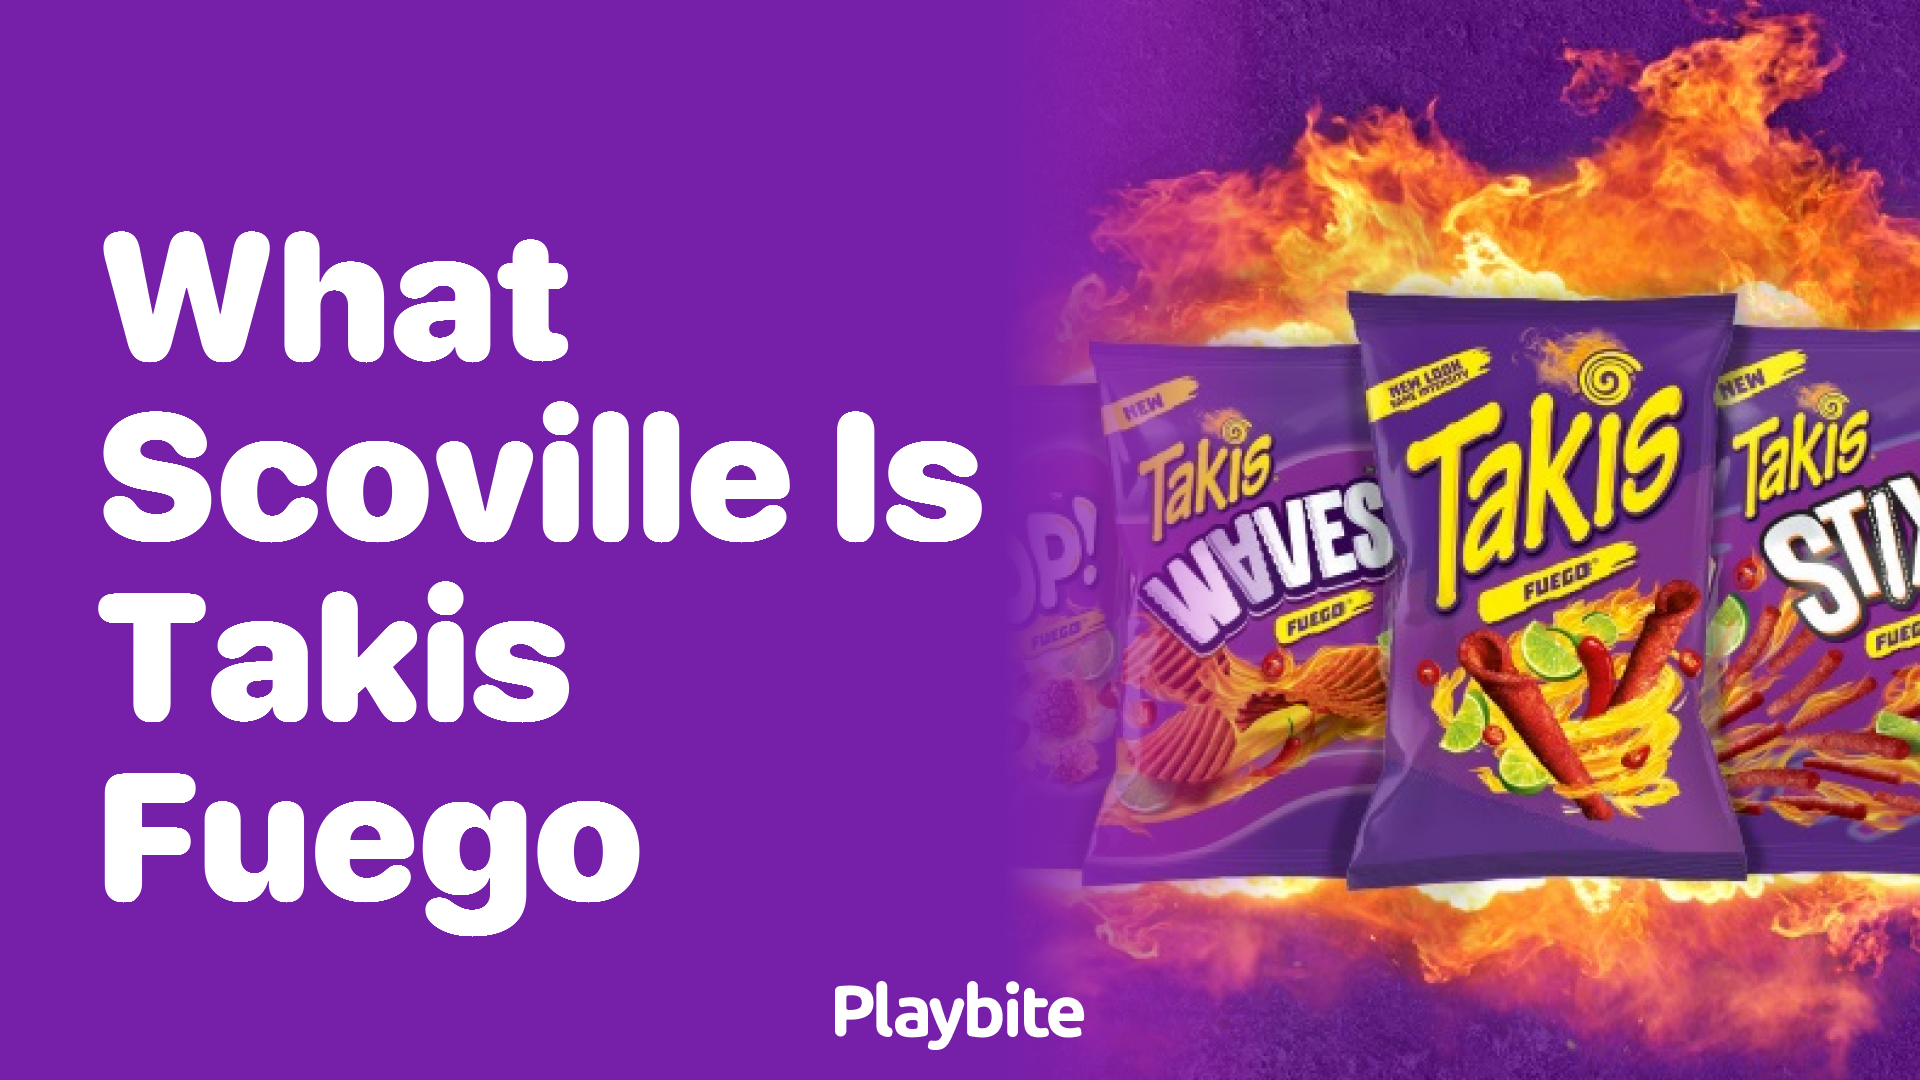 What Scoville rating do Takis Fuego have?